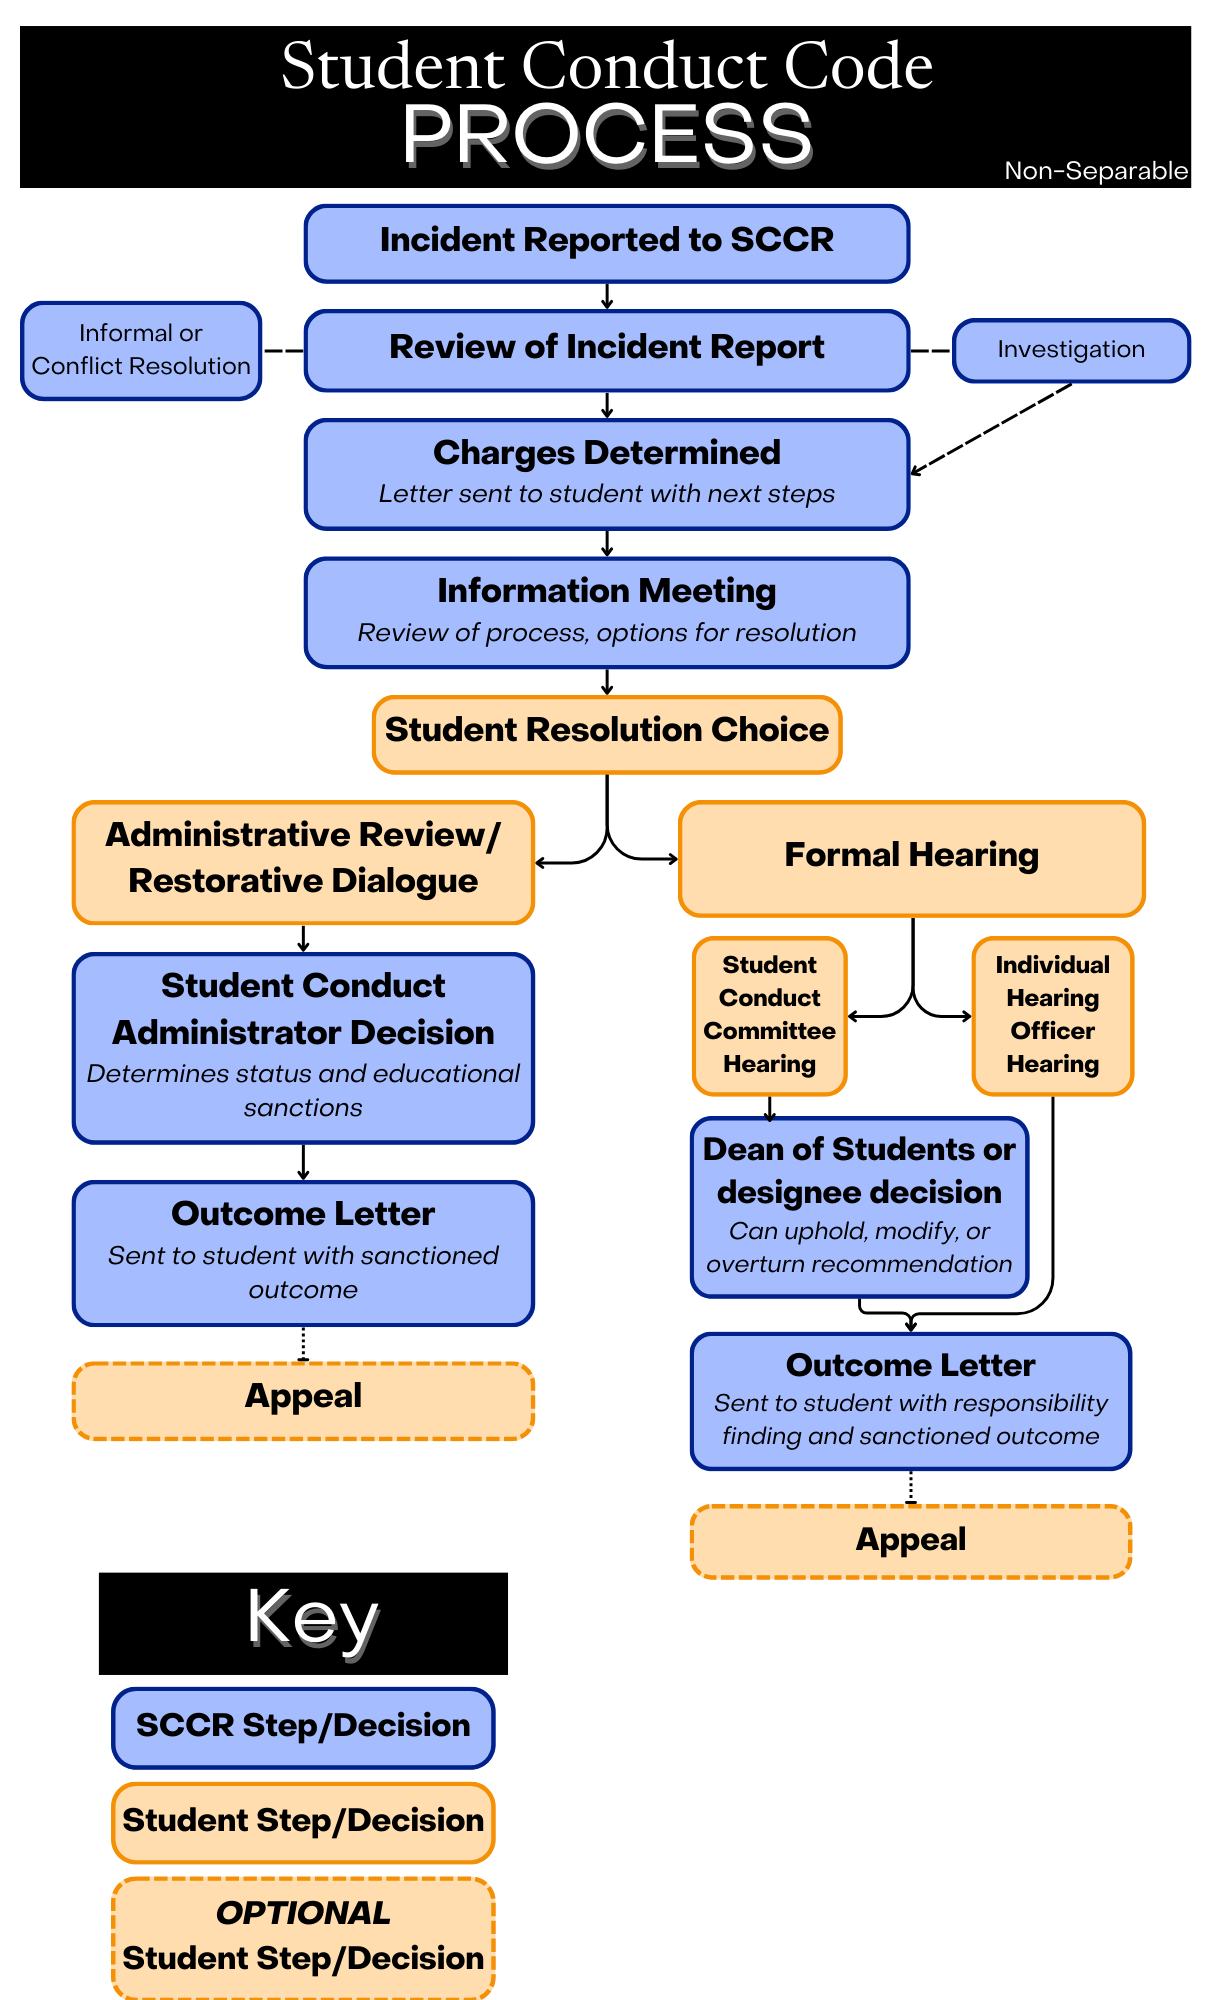 This is an image depicting the Student Conduct Code process, as explained in the Student Conduct Code and Student Honor Code. In summary, once an incident is reported to Student Conduct and Conflict Resolution (SCCR), the director of SCCR or a designee will review the incident report. Next a charge letter will be issued out and an information meeting will be scheduled. The incident may need possible investigation before a charge letter is sent out. From the informational meeting, a decision will be made whether to follow an informal or formal conduct code process. In the informal process, there is an administrative review of the case, a decision is made regarding the case and an outcome letter is sent to the student.  Decisions can be appealed. In the formal process, a Student Conduct Committee, a University Officials Board or the individual hearing office will hear the case. If the Student Conduct Committee hears the case, witnesses will be contacted. The hearing has 3 to 5 members (including students, staff and faculty). After the hearing, a recommendation will be sent to the Dean of Students or designee for a decision. An outcome letter will be sent to the student. The student can then fulfill the sanctions or appeal the decision. If the University Officials Board hears the case, witnesses will be contacted. The hearing has 3 staff and faculty members. After the hearing, a recommendation will be sent to the Dean of Students or designee for a decision. An outcome letter will be sent to the student. The student can then fulfill the sanctions or appeal the decision. Finally, if an individual hearing office hears the case, witnesses will be contacted. The hearing is with an individual hearing officer. An outcome letter will be sent to the student. The student can then fulfill the sanctions or appeal the decision.